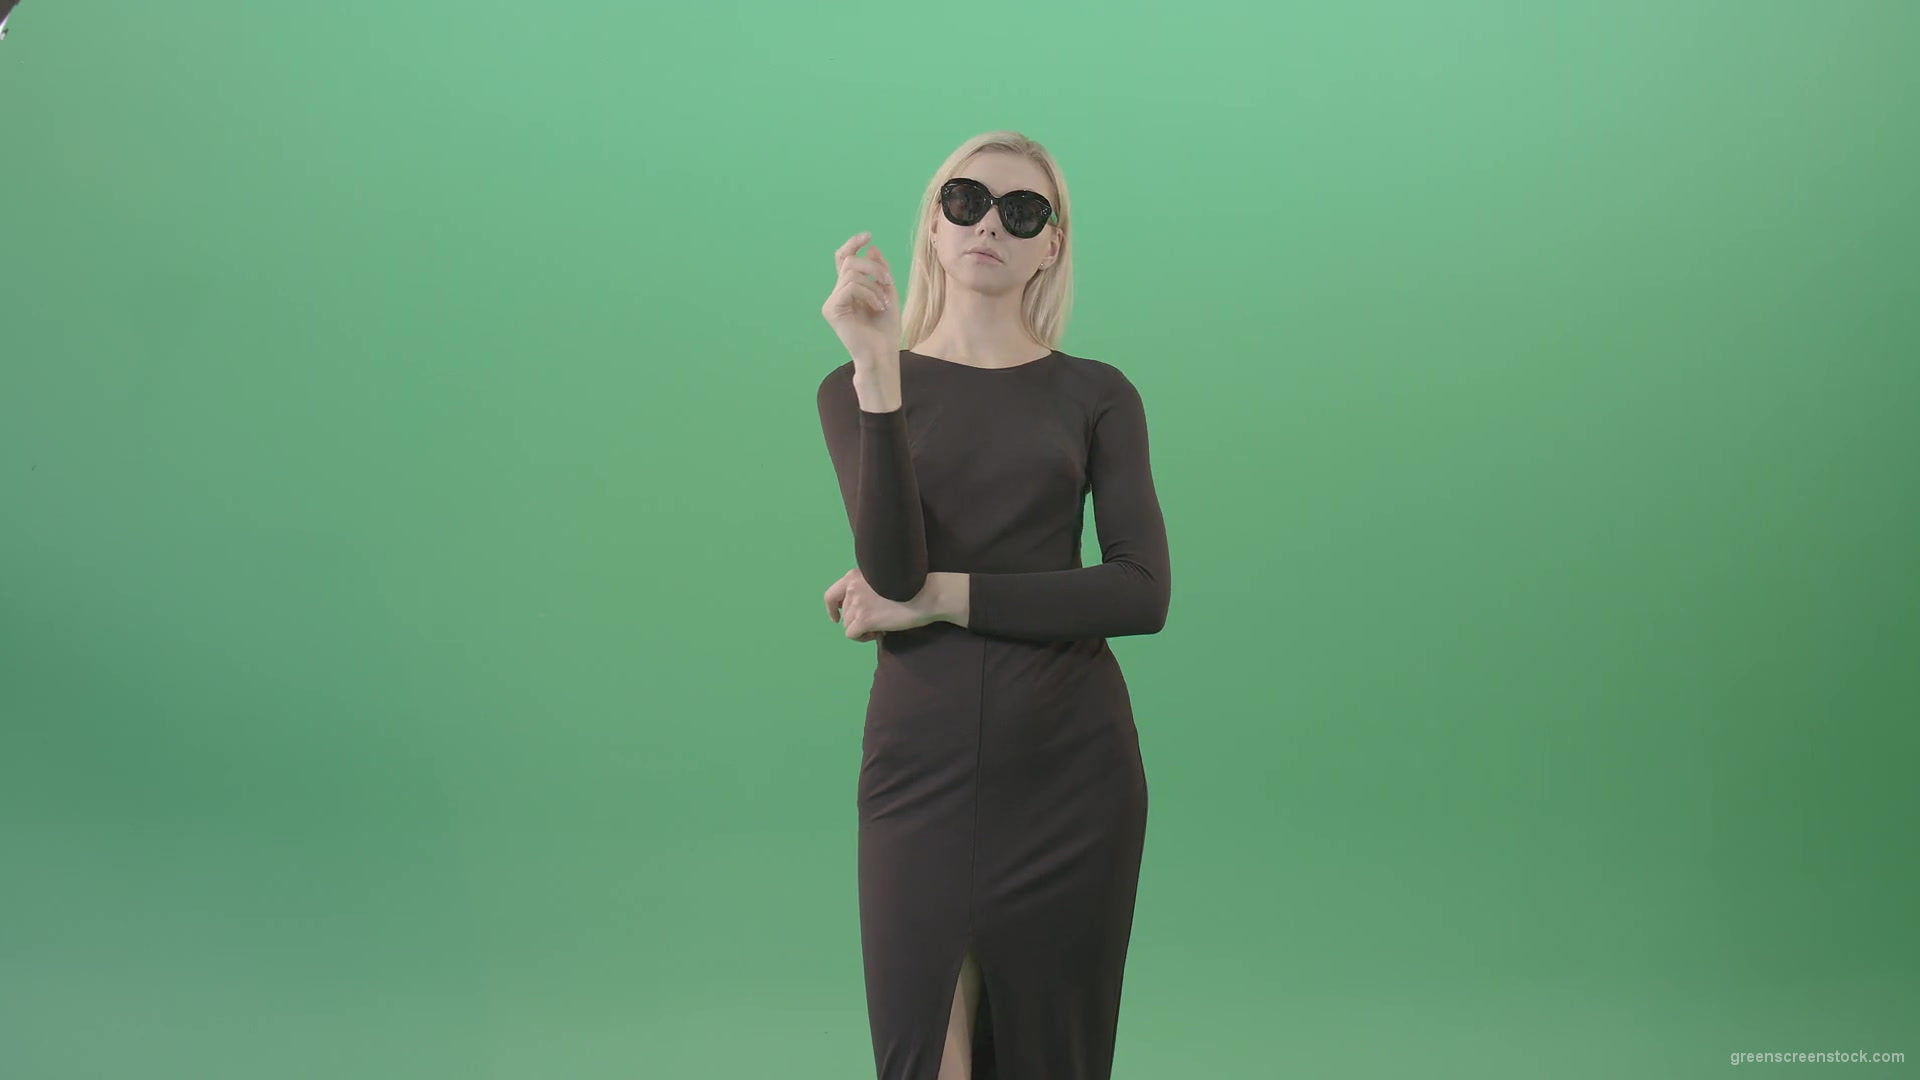 Elegant-woman-in-black-suite-searching-a-virtual-products-on-touch-screen-in-green-screen-studio-4K-Video-Footage-1920_007 Green Screen Stock